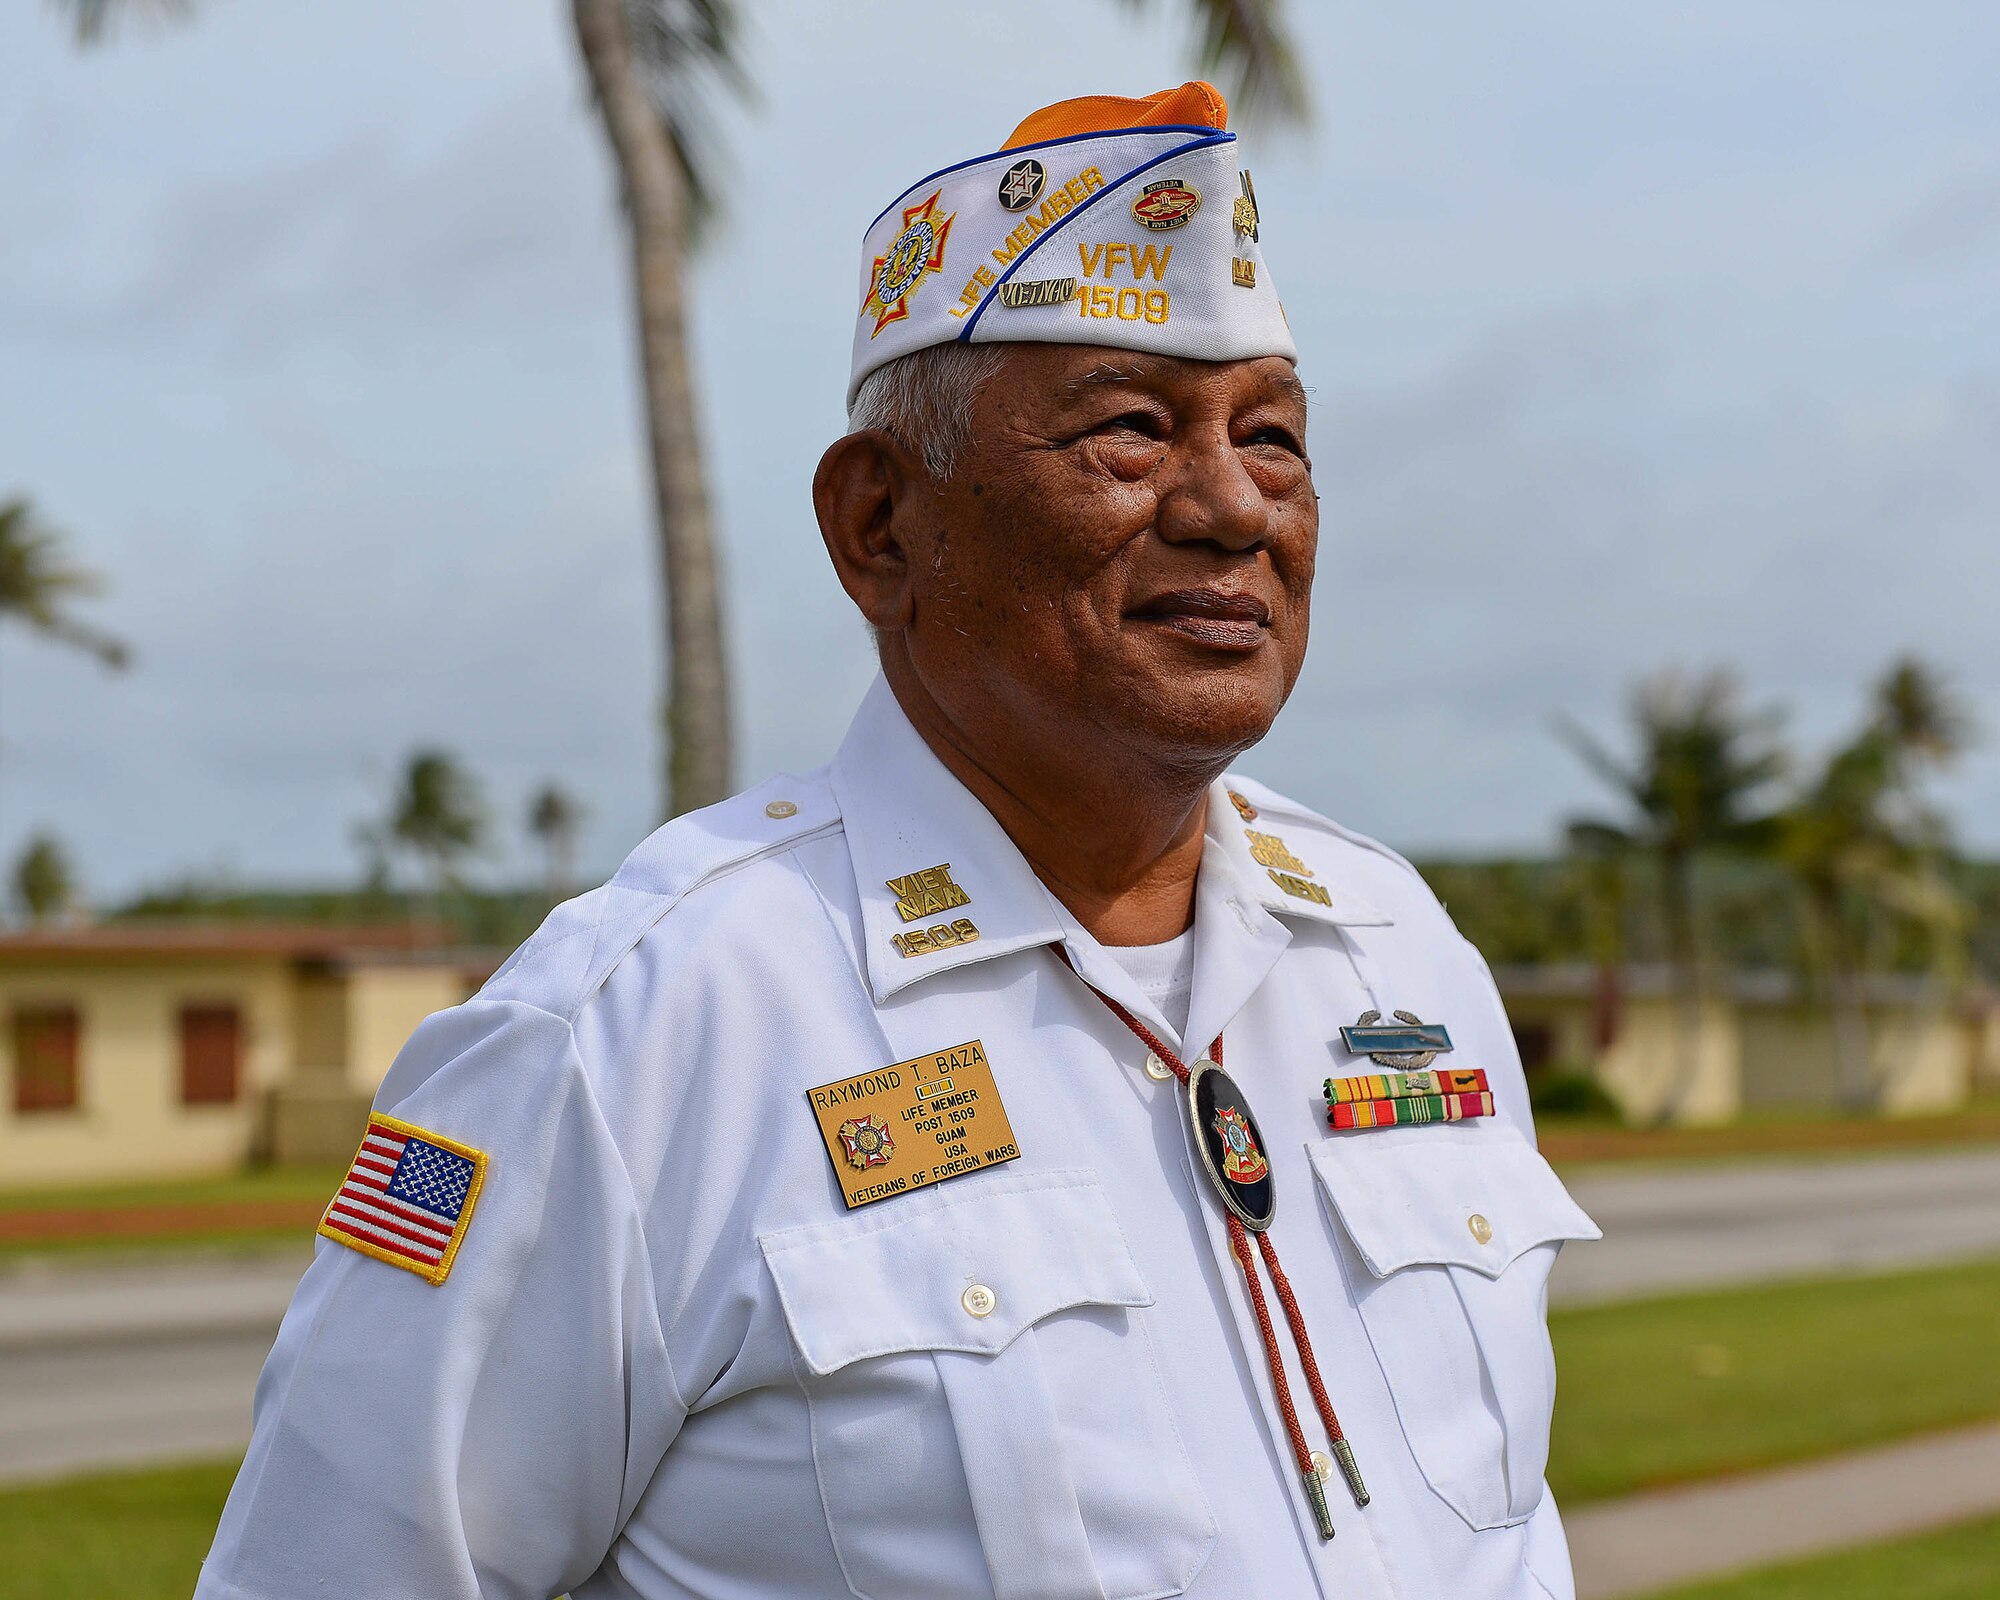 Raymond Baza, retired U.S. Army Vietnam veteran and vice commander of the Veteran of Foreign Wars Post 1509, observes the F-4E Phantom II Rededication Ceremony April 21, 2017, at Andersen Air Force Base, Guam. Baza served in the Vietnam War from 1969-1972. (U.S. Air Force photo by Airman 1st Class Christopher Quail/Released)